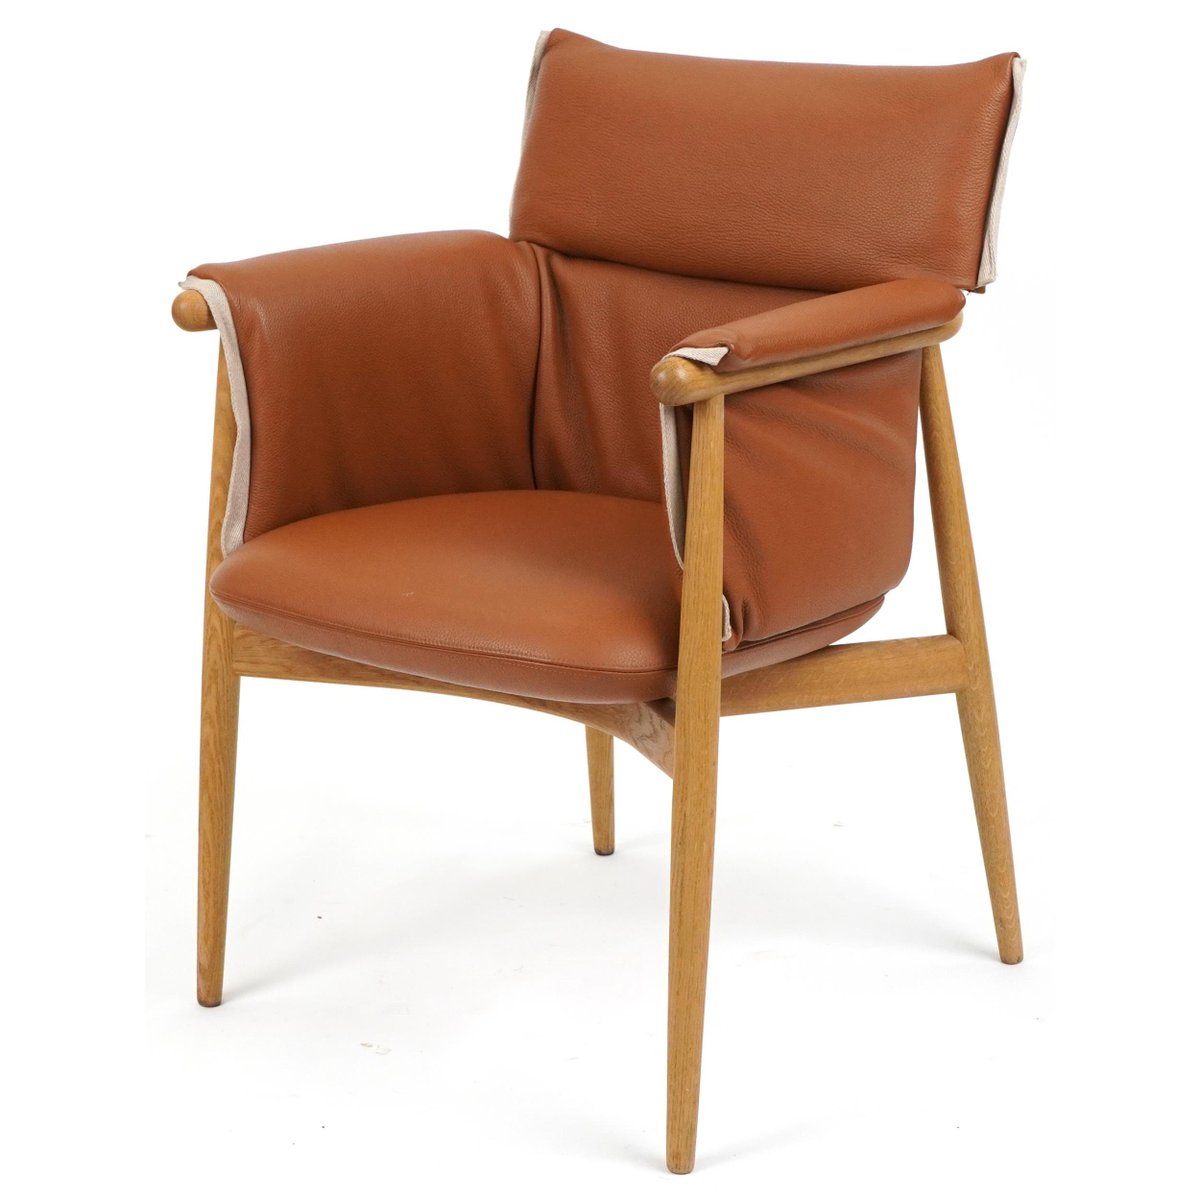 Day Two of our Antiques, Collectables, & Jewellery Auction starts today at 09:30 AM!

Lot 1001 is this Carl Hansen & Son, Danish lightwood and brown leather armchair.

Browse the catalogue: bitly.ws/3huvD

#eastbourneauctions #danishdesign #lightwood #brownleather